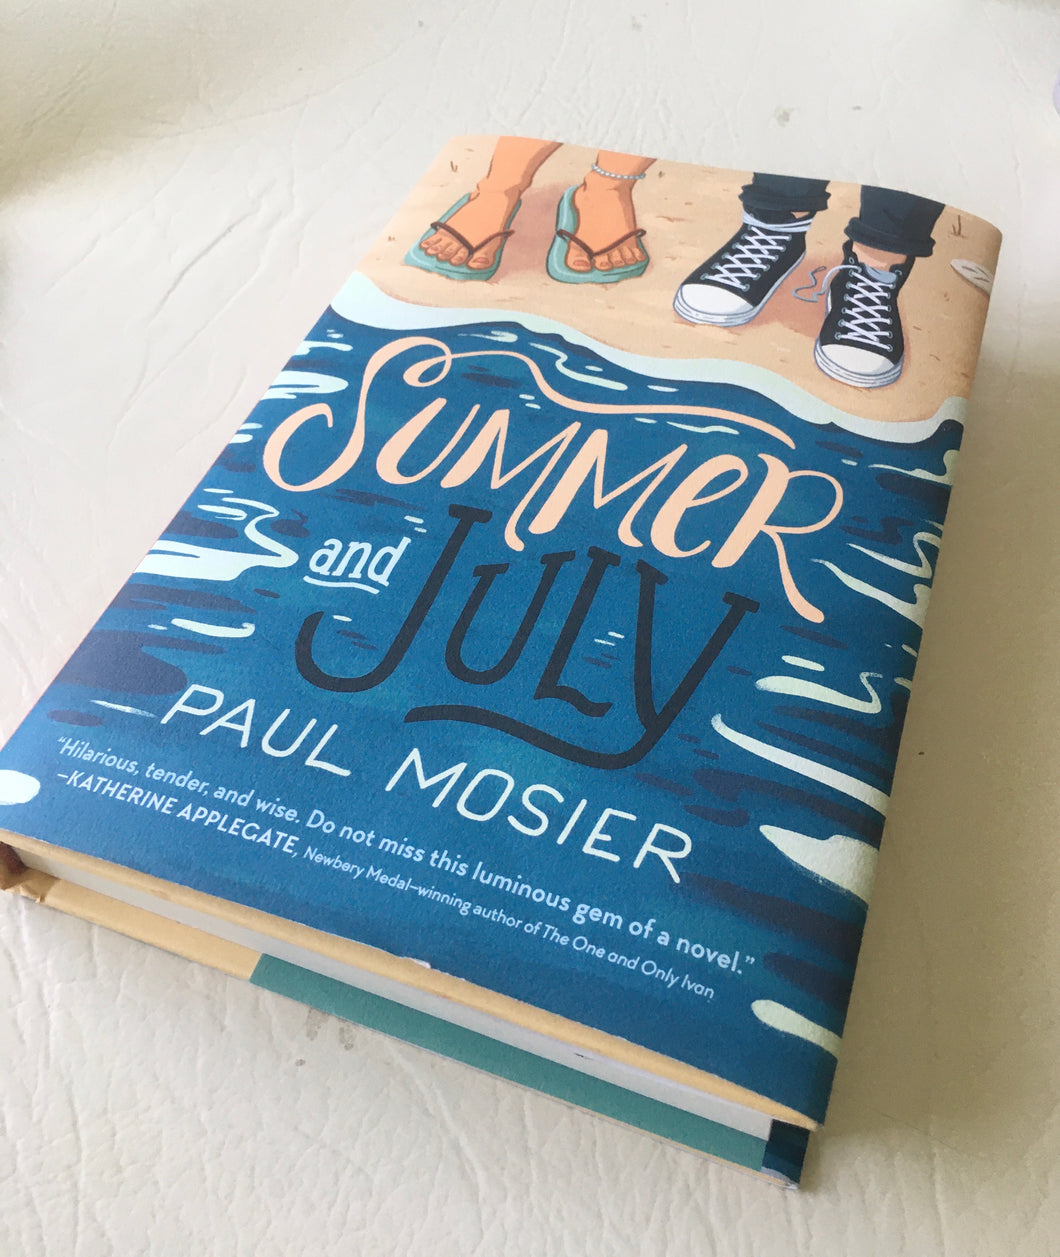 Summer and July by Paul Mosier (signed and personalized)